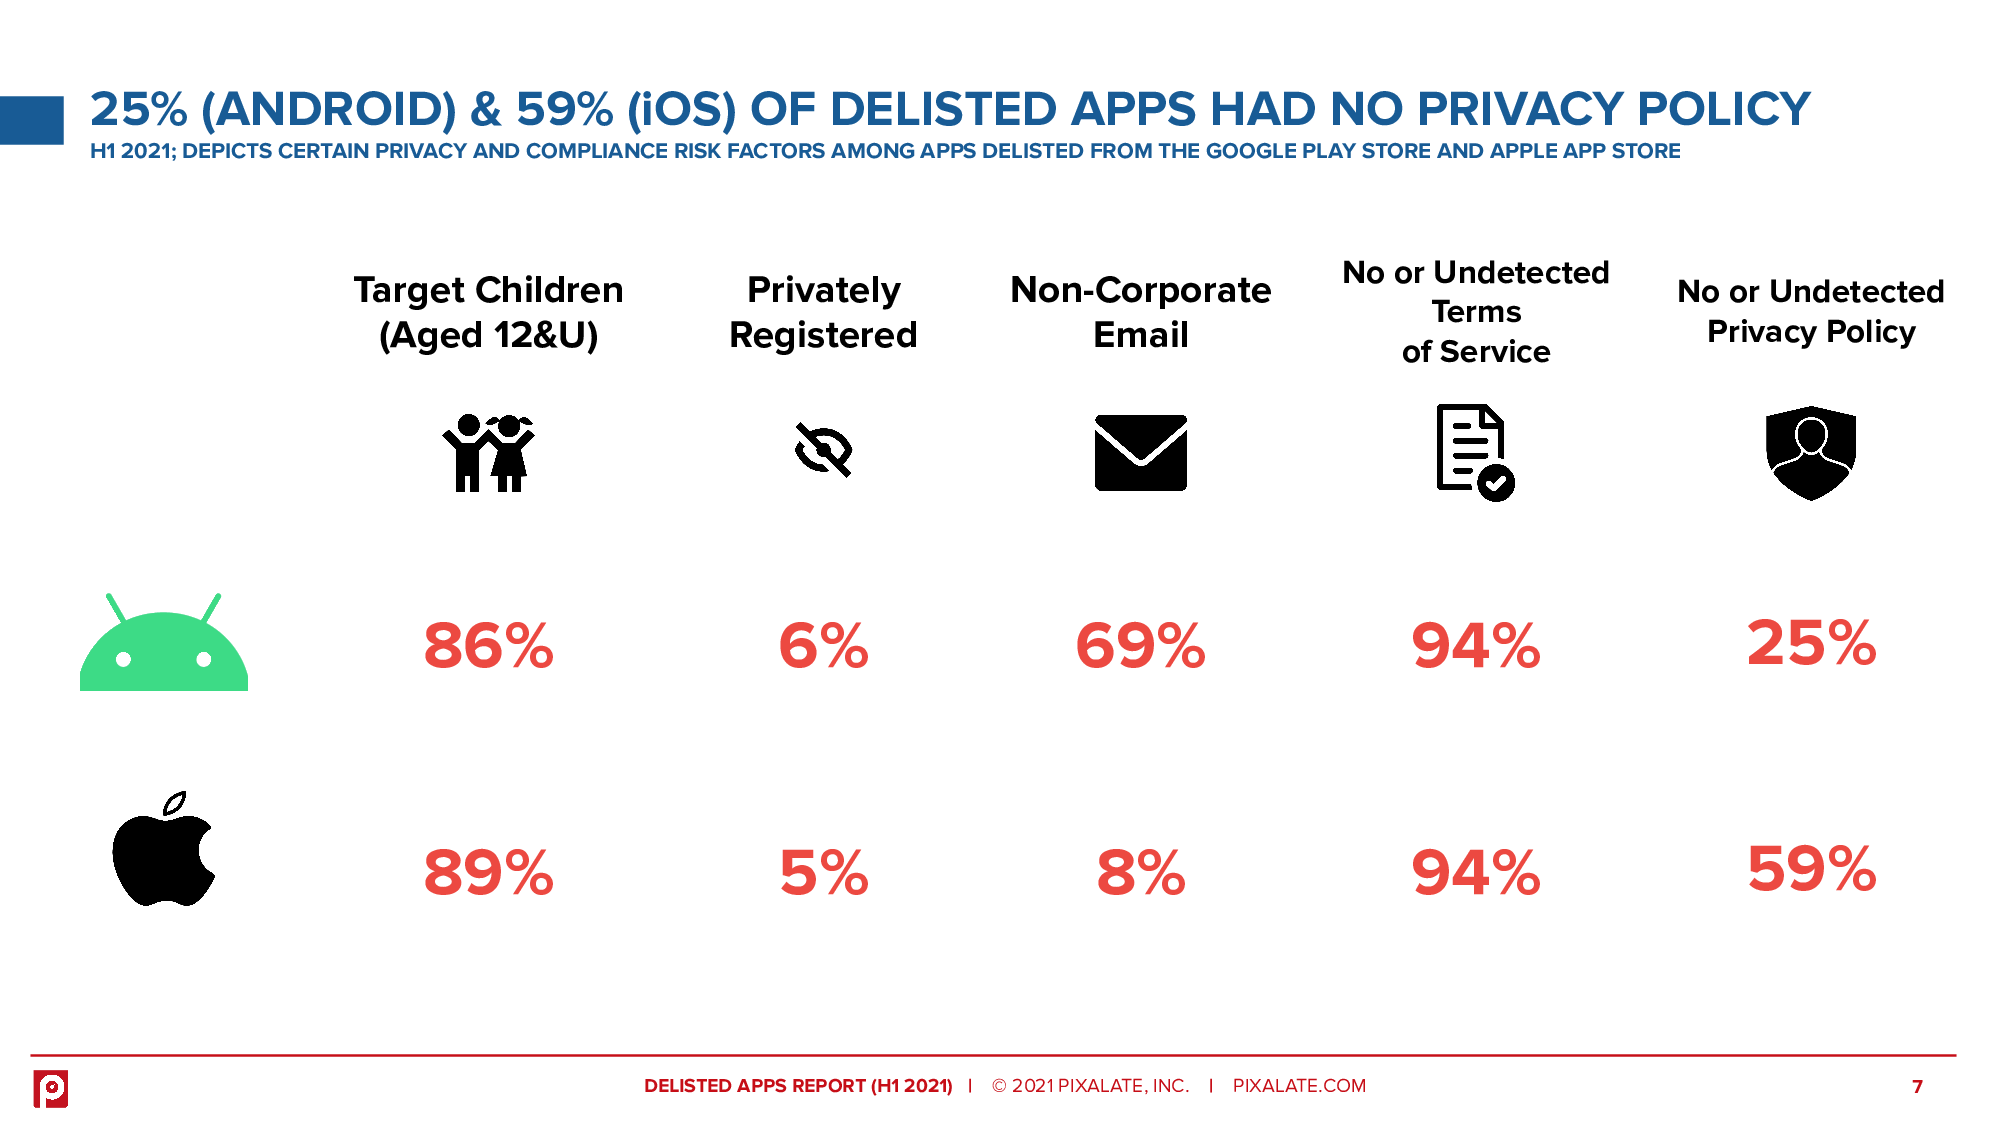 59% of delisted iOS apps and 25% of Android apps had no privacy policy